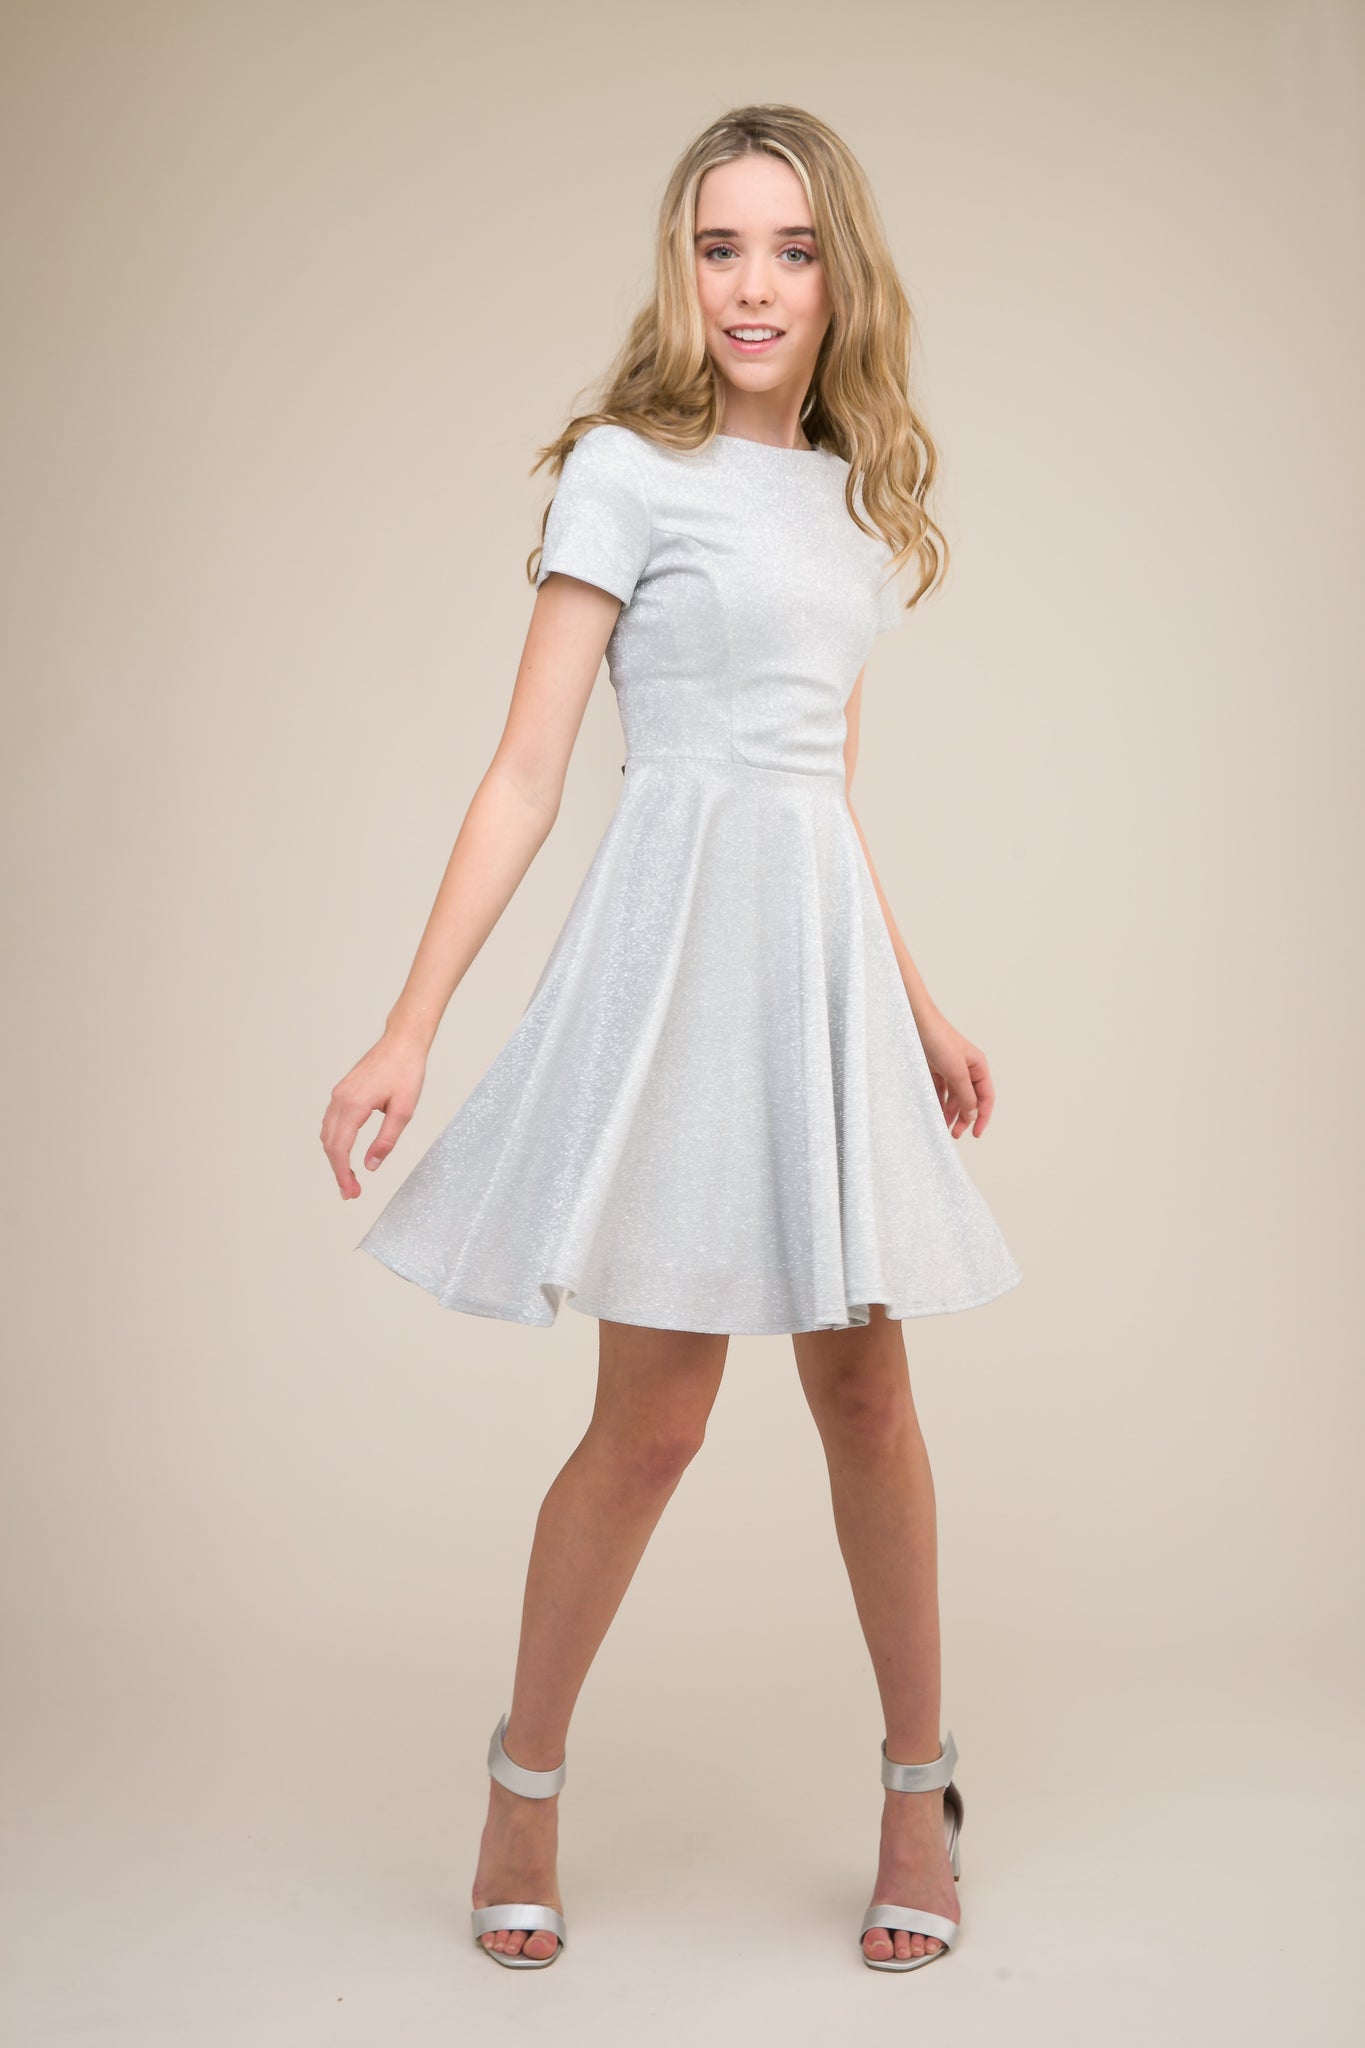 This is an all over silver stretch glitter dress made with soft lining. It's non-scratch fabric is a perfect dress that hits right above the knee and has a lower v-back detailing.